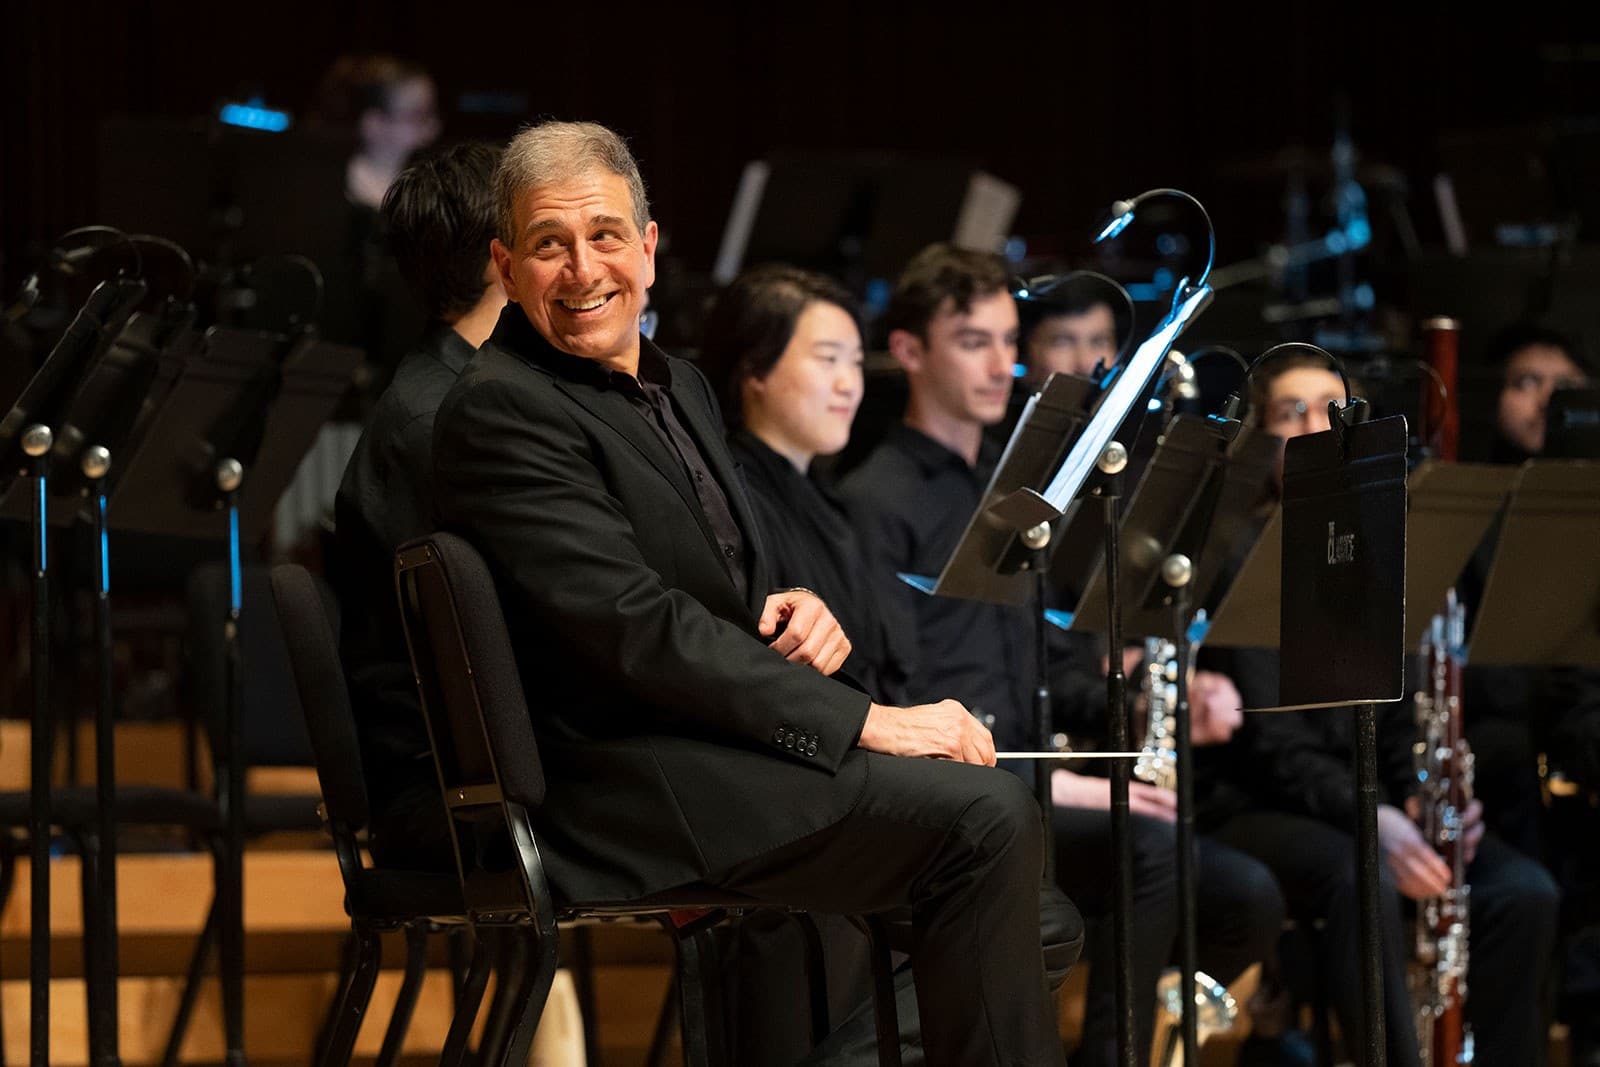 Man sitting on stage among an orchestra smiles off in the distance.